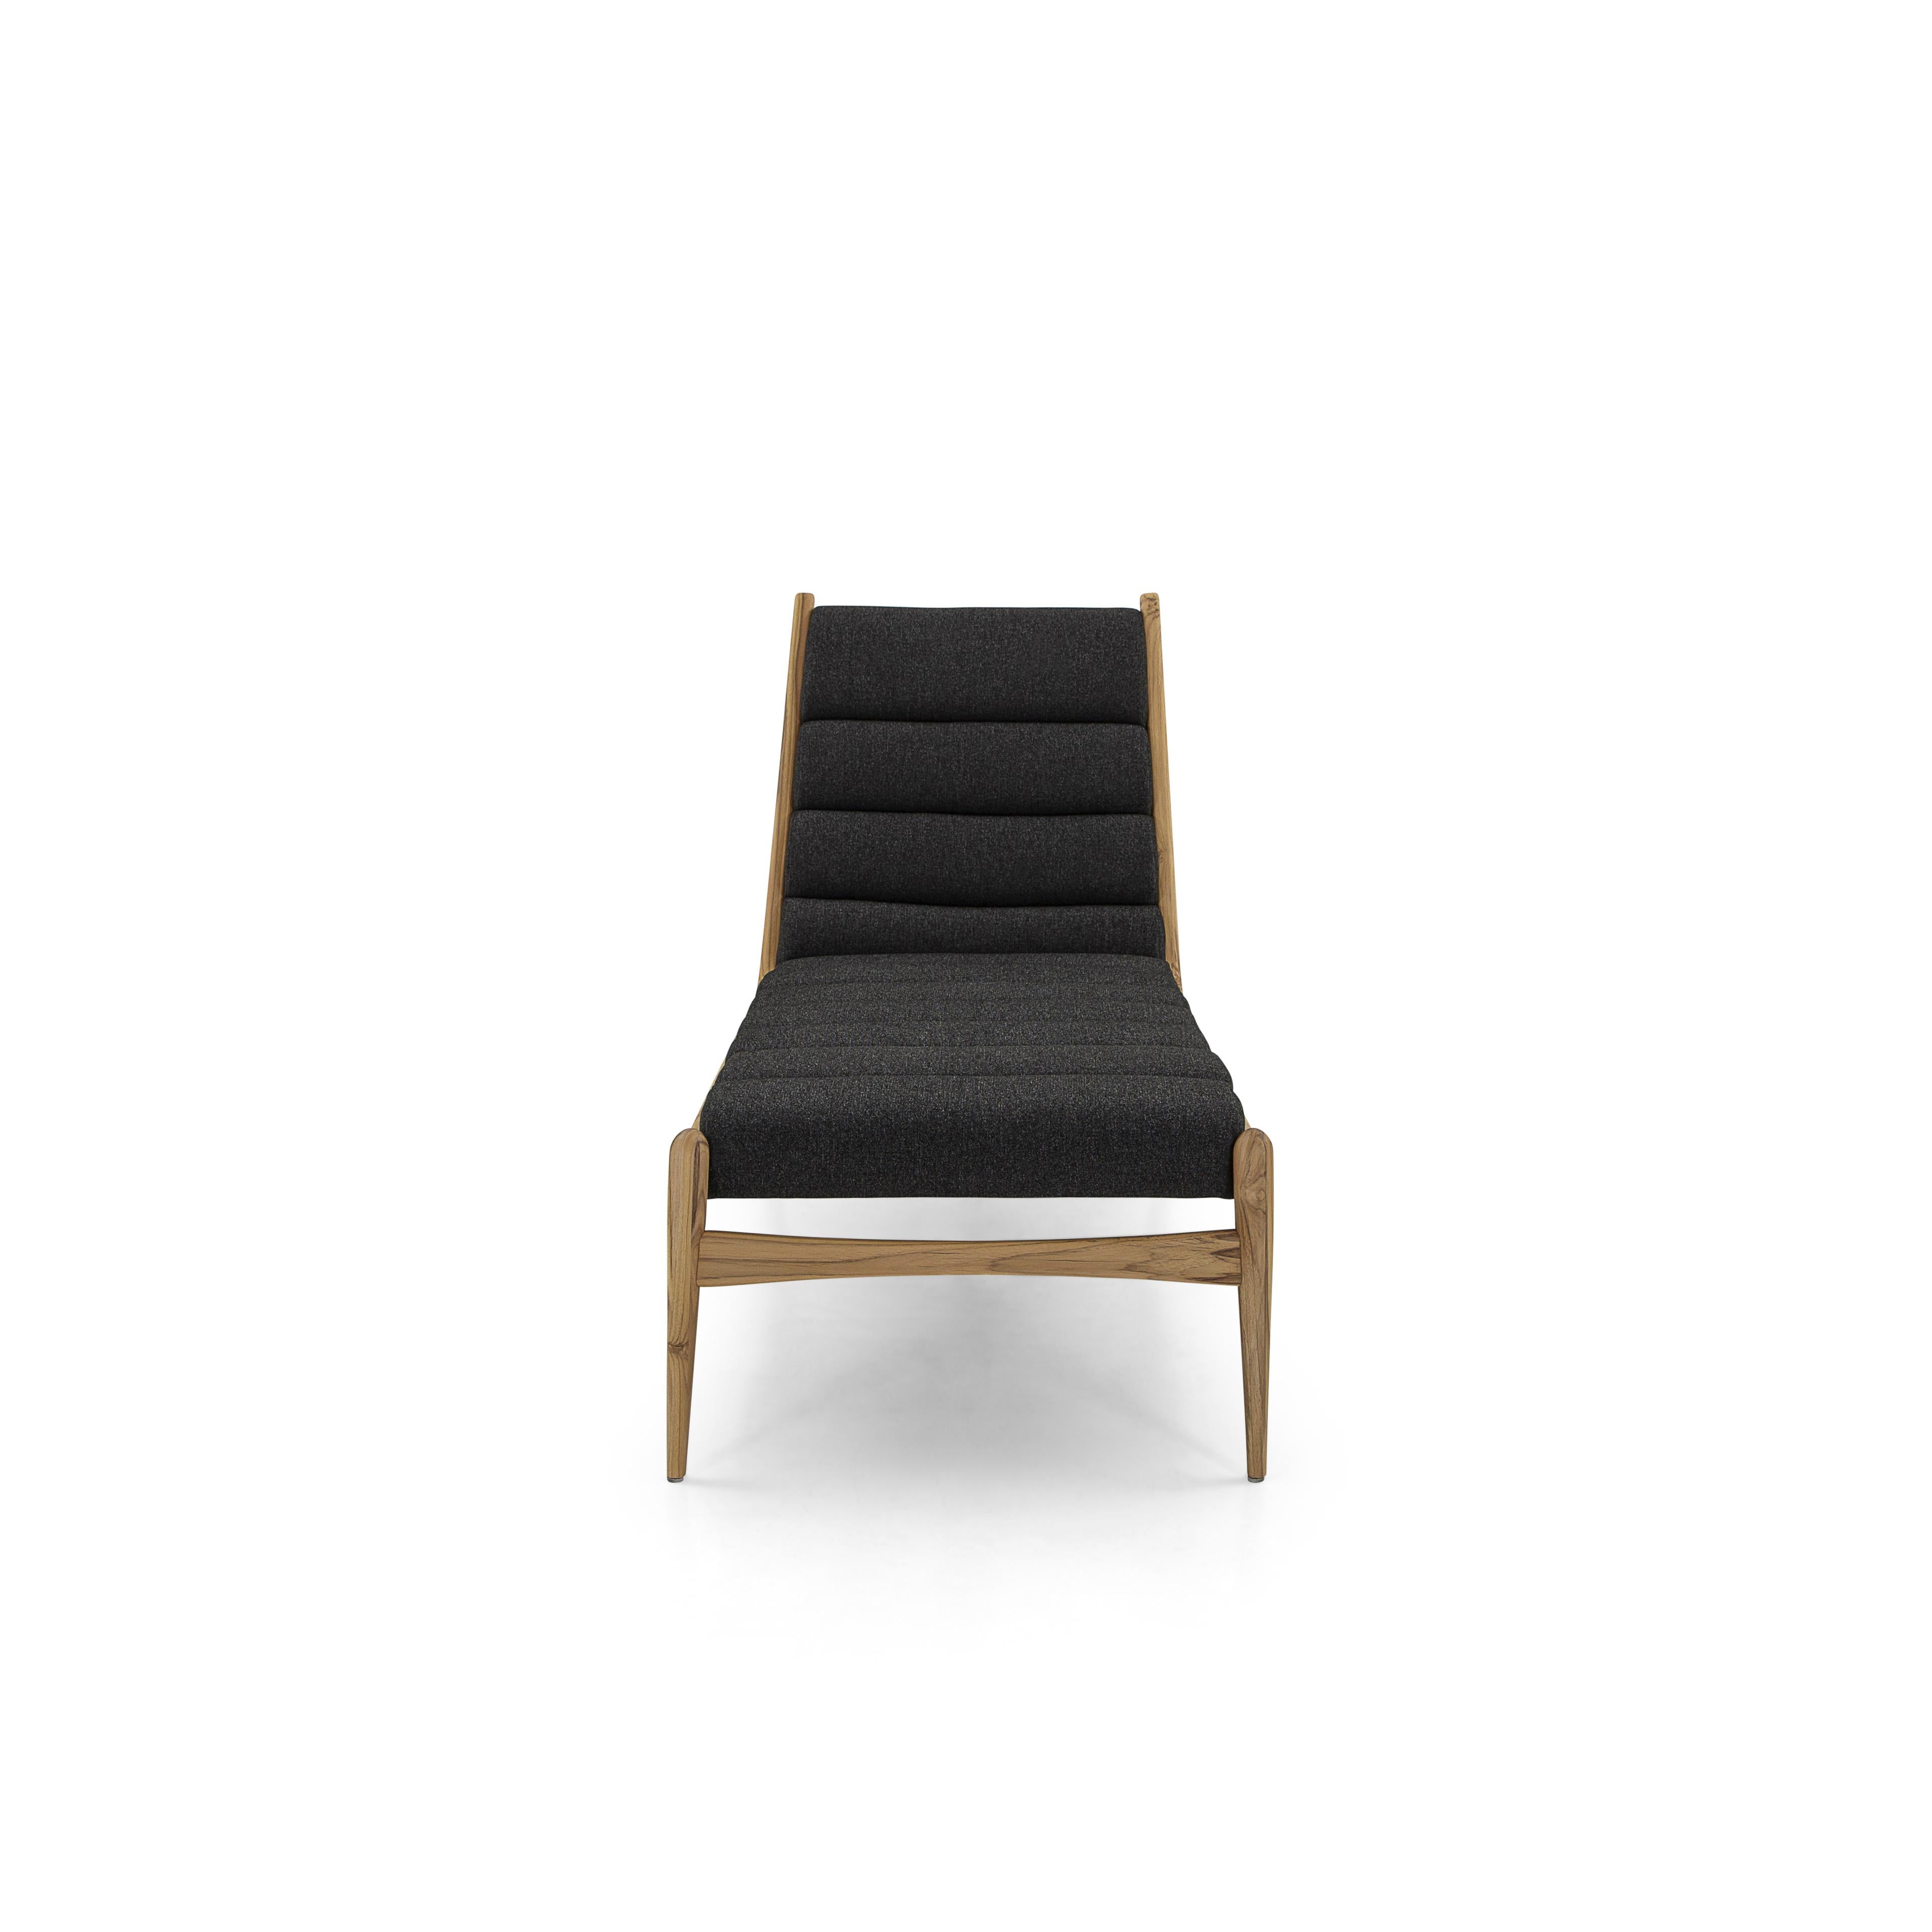 The Wave indoor chaise lounge in a teak wood Uultis finish, and its upholstery are reminiscent of waves in black fabric, which is the perfect addition for any contemporary, minimalist, or traditional design project. This chaise is the ideal chair to